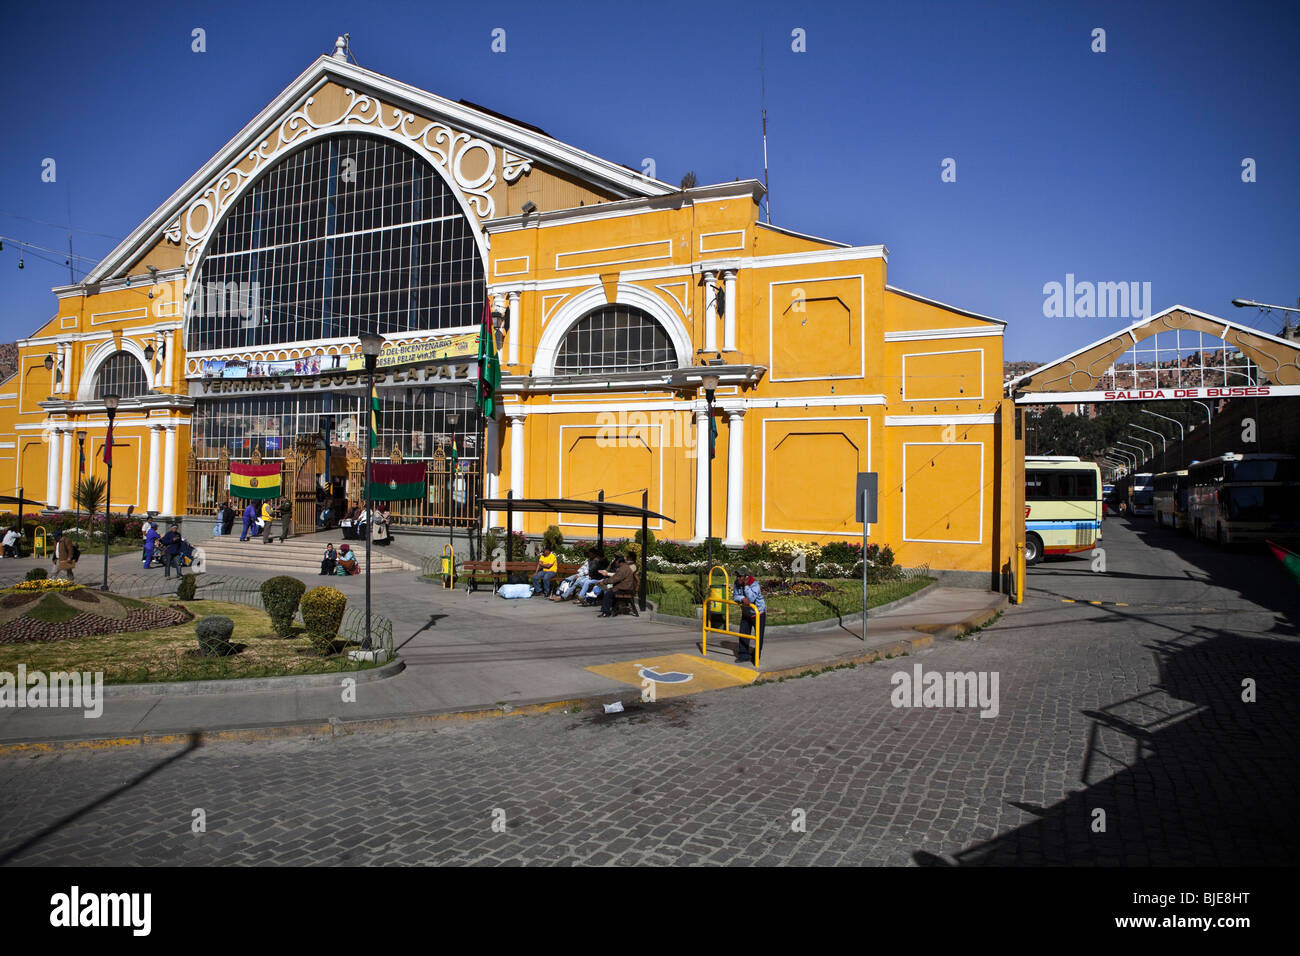 Bus terminal station in central (terminal de buses) La Paz, Bolivia, Altiplano, Andes, South America Stock Photo